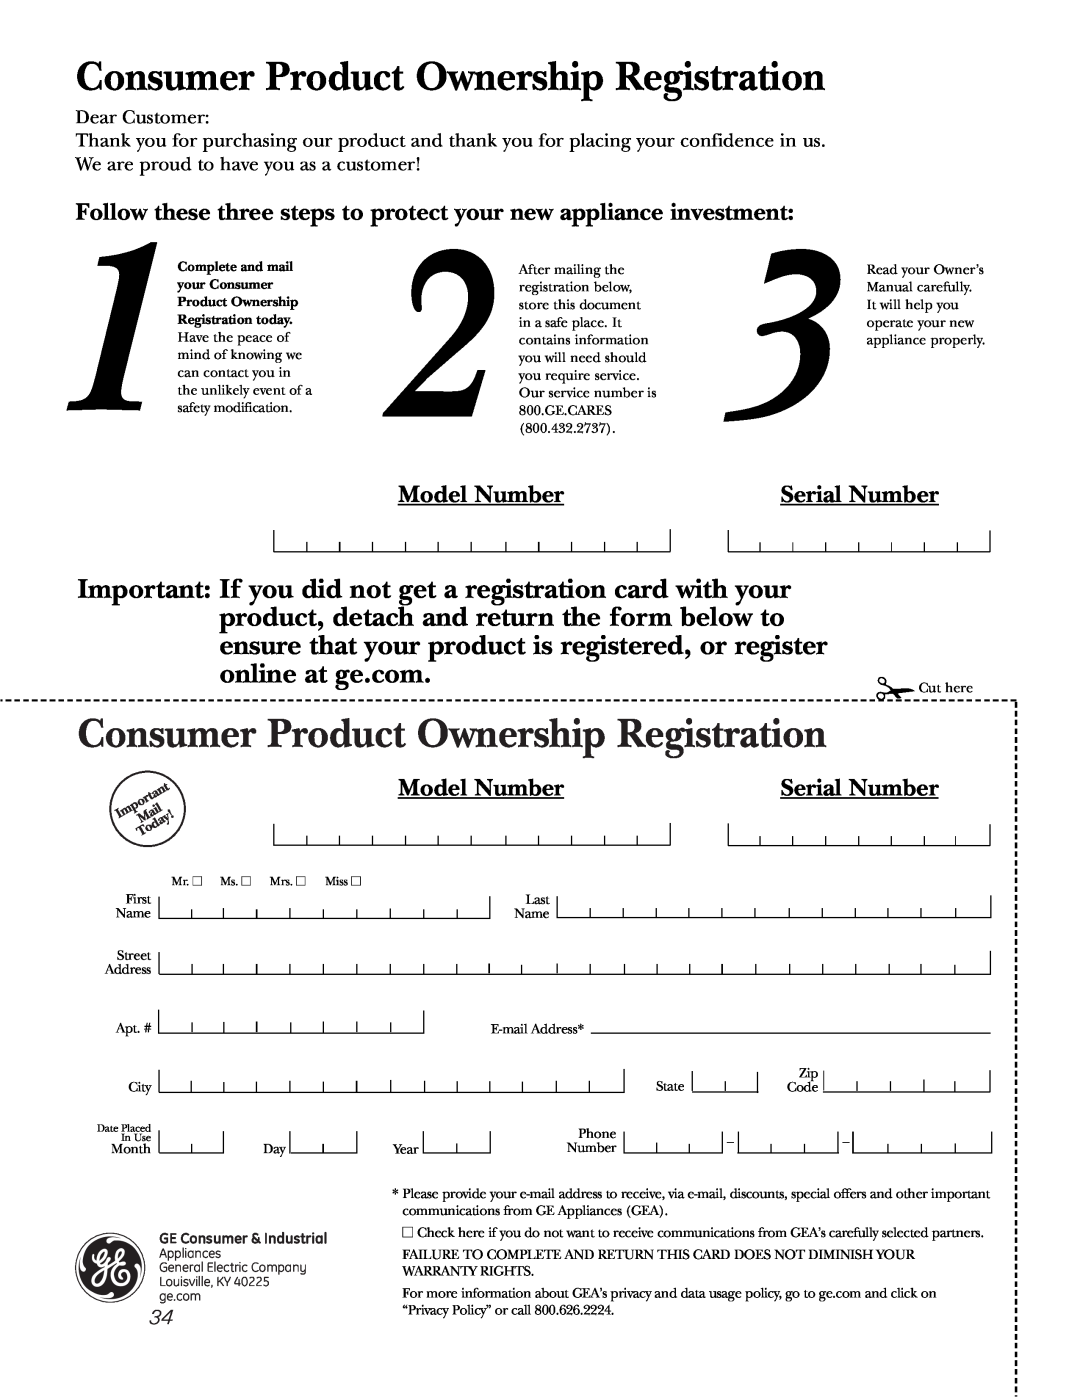 GE JBP89 Consumer Product Ownership Registration, Model Number, Serial Number, Complete and mail, your Consumer 